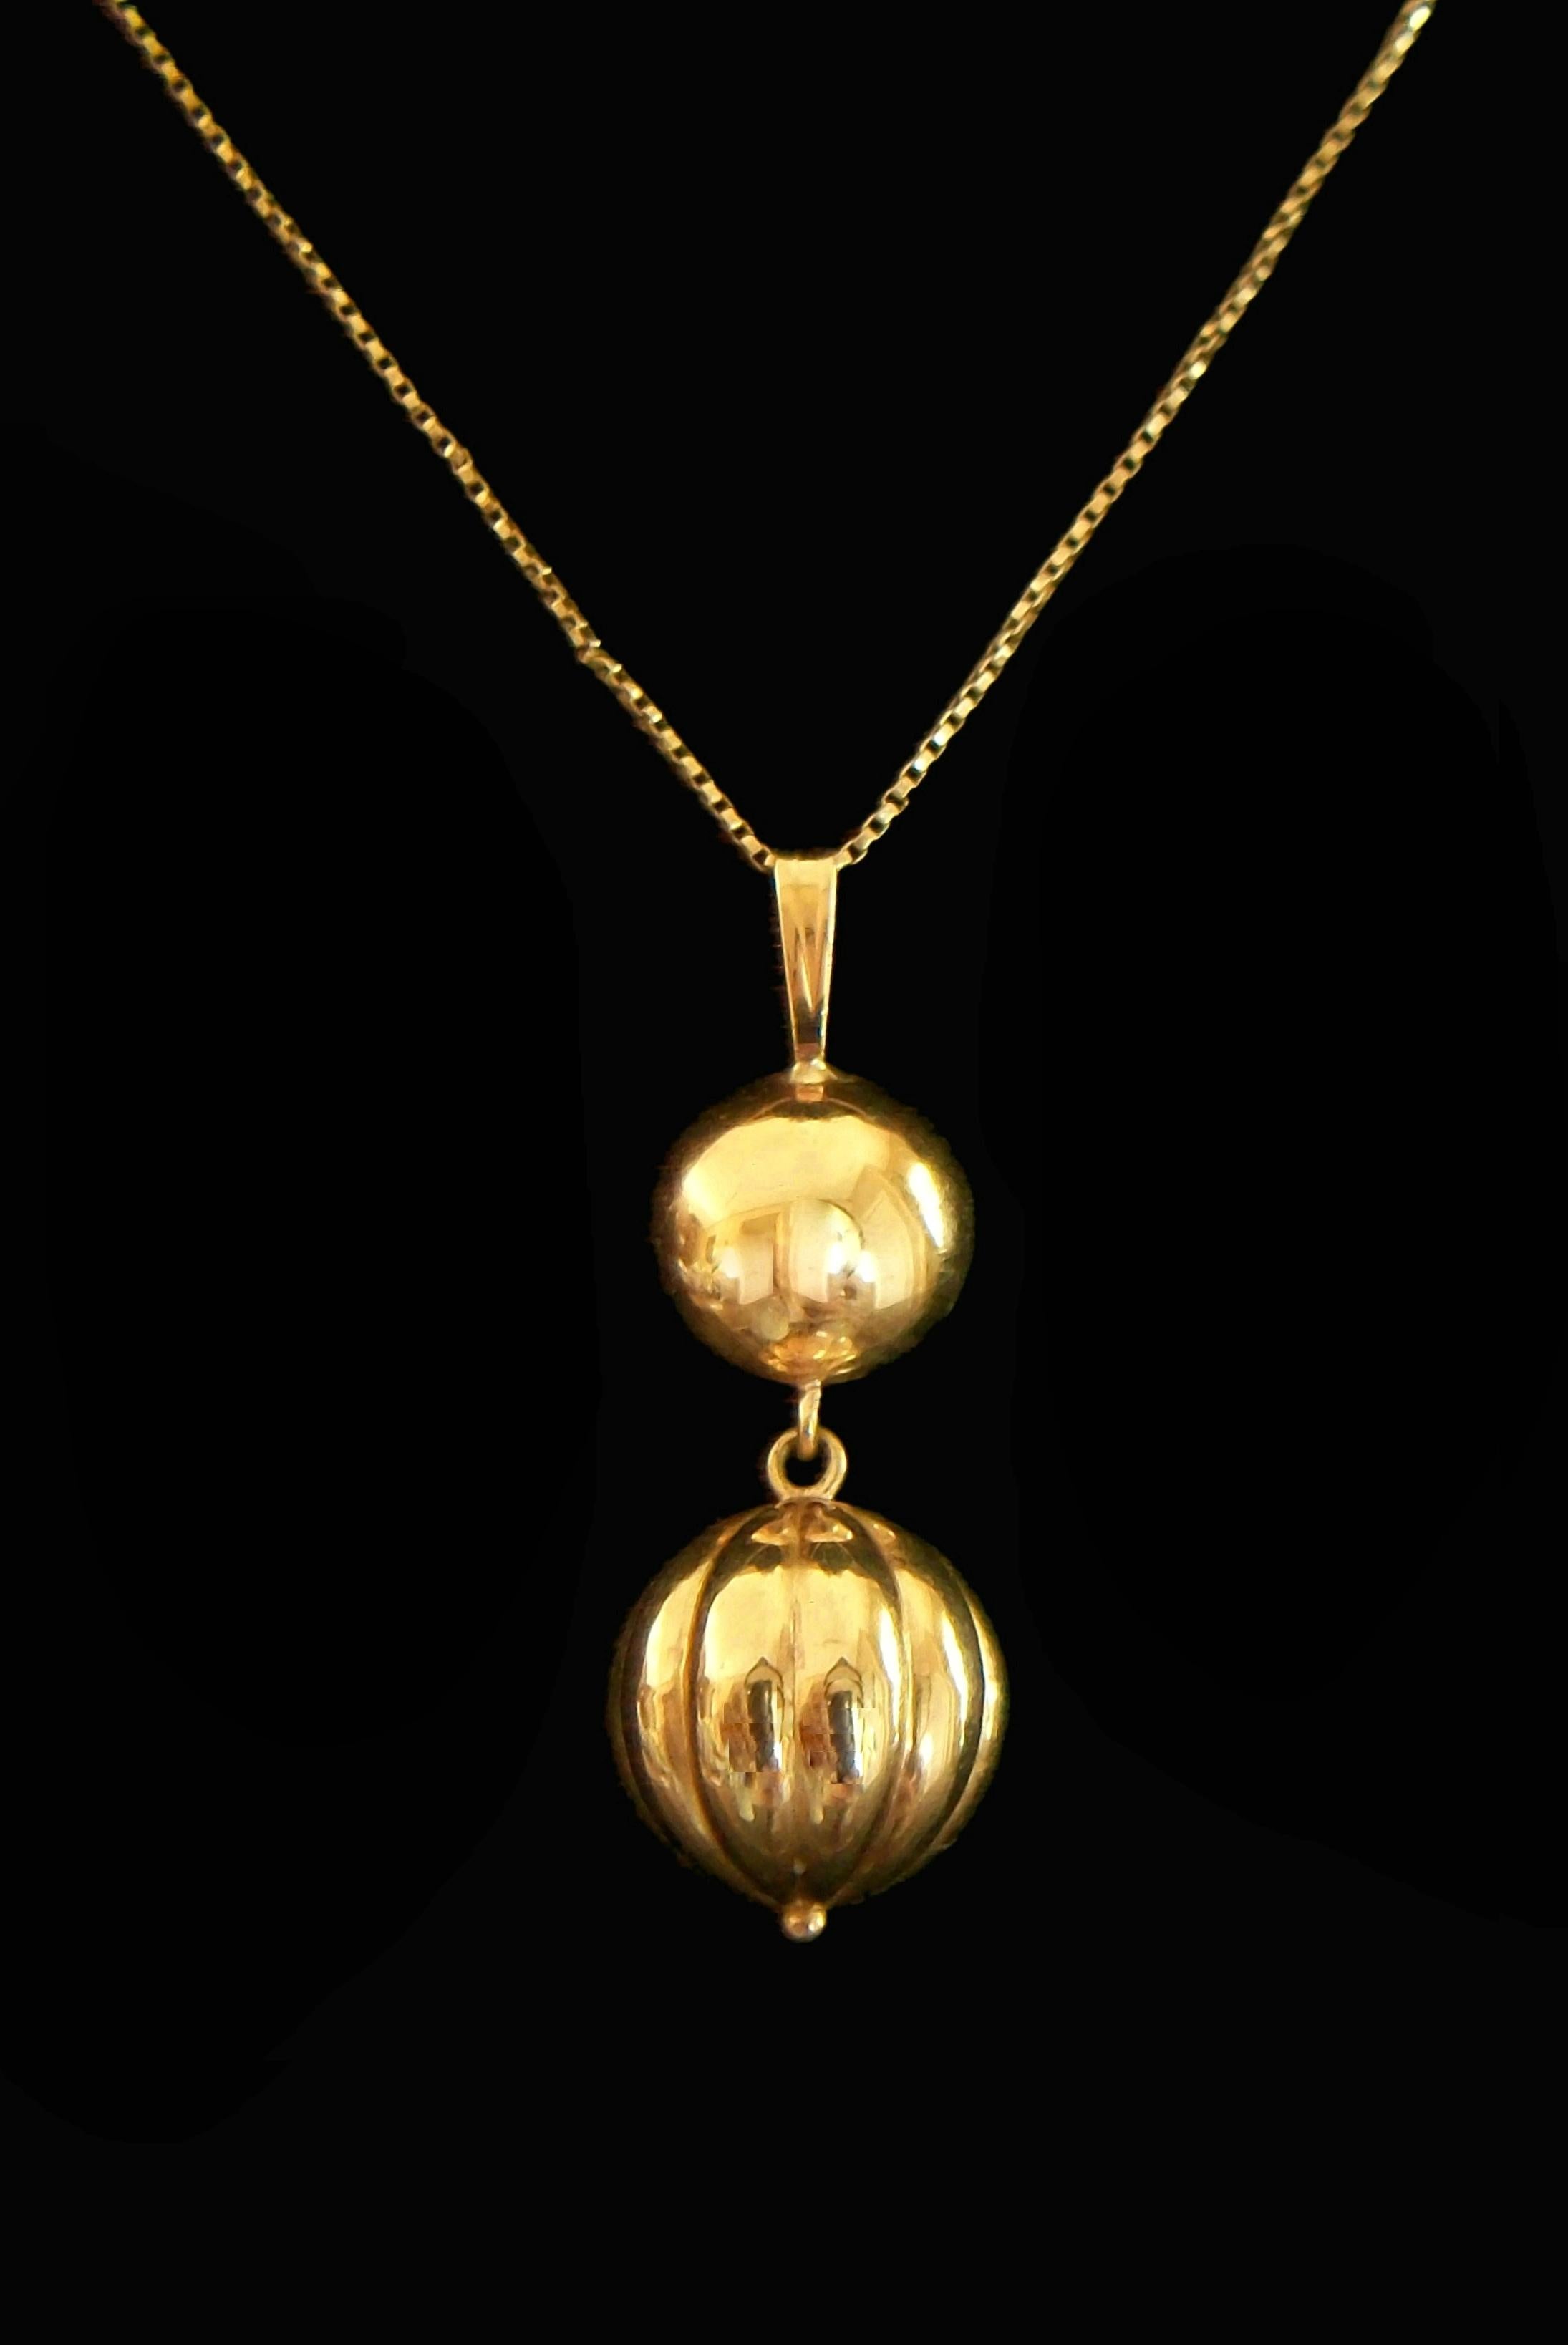 Mid Century Modern pendant necklace - hand made from 10K yellow gold - pendant suspended by a large bale on an 18